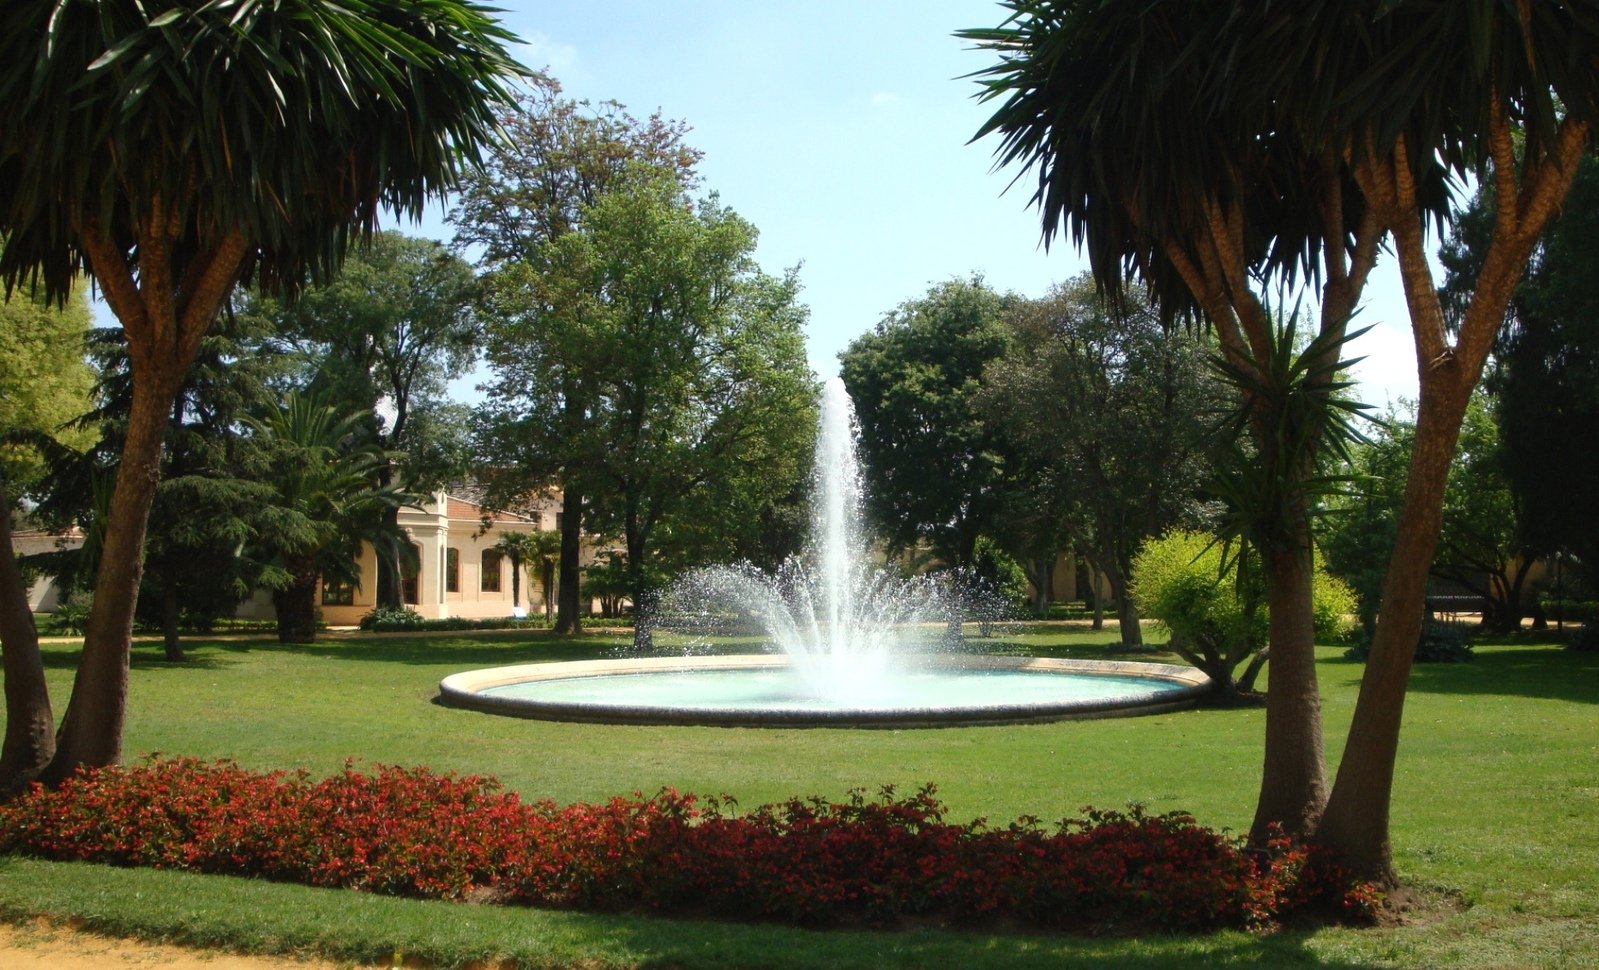 the fountain features three sprays of water